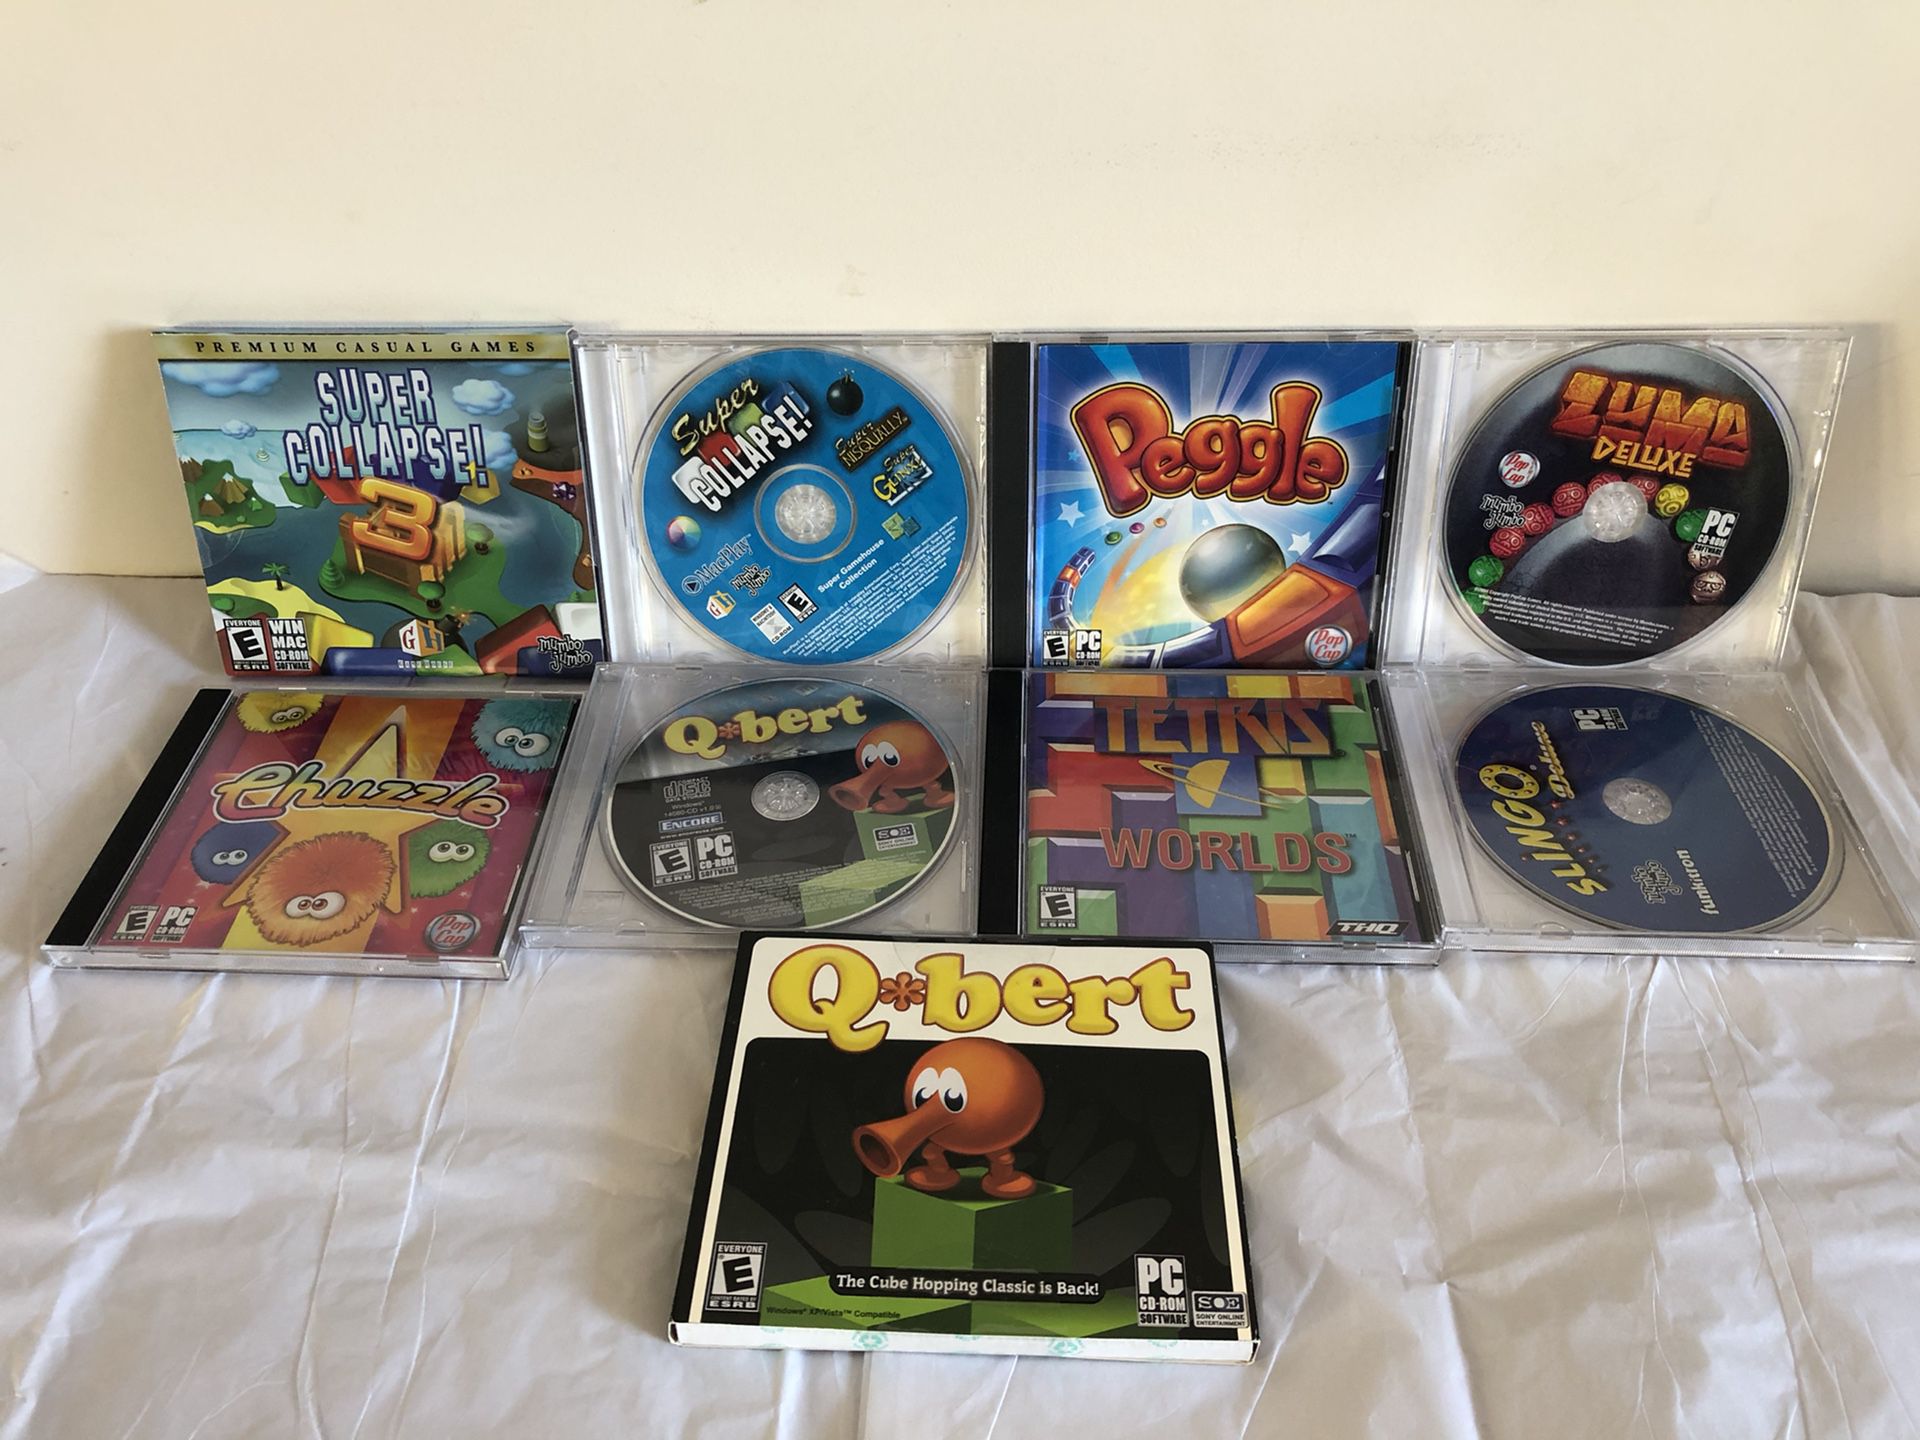 9 PC Games